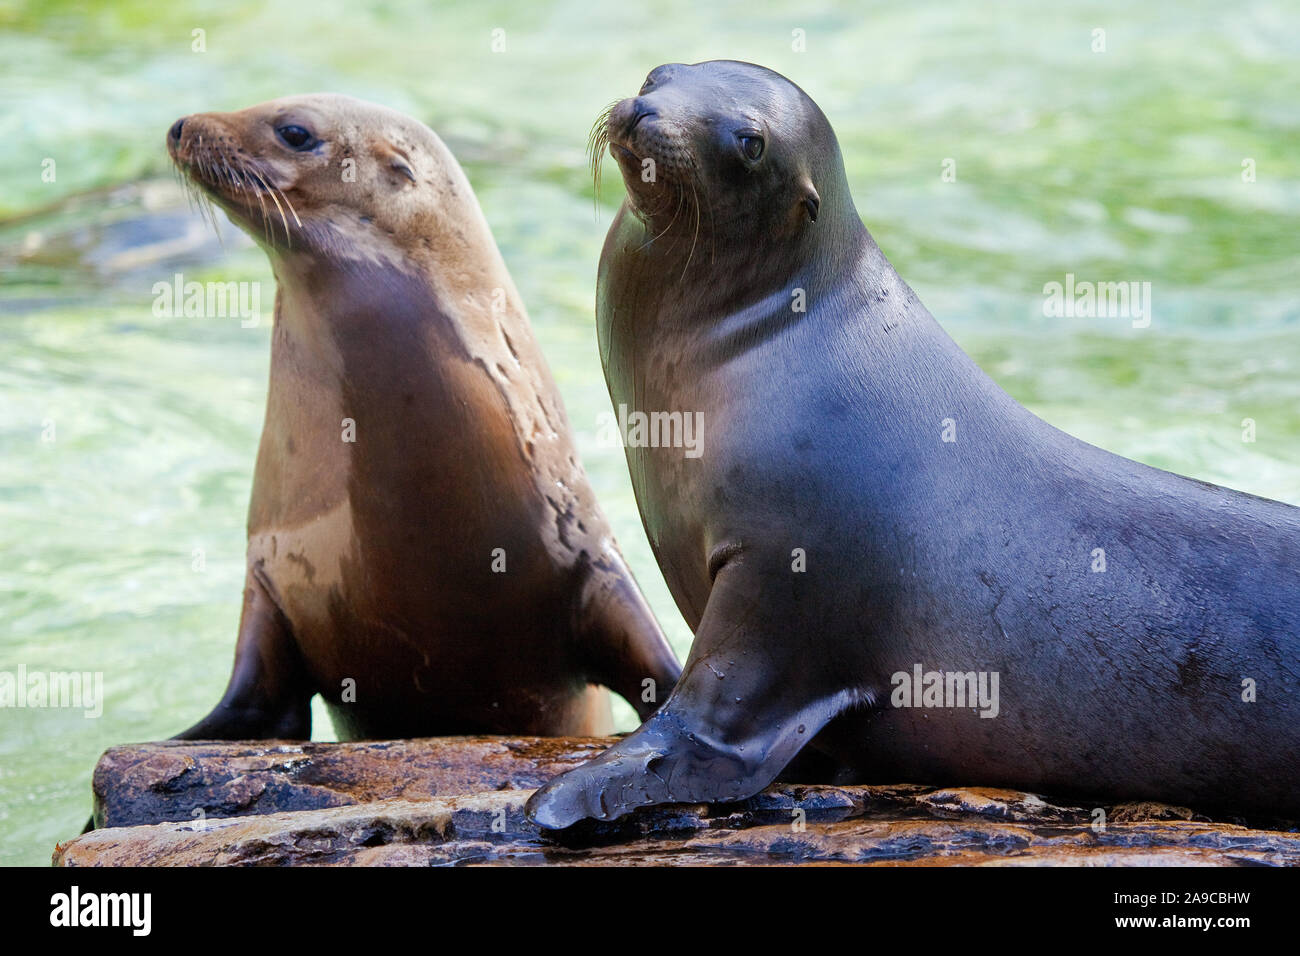 A view of two Sea Lions in captivity Stock Photo Alamy